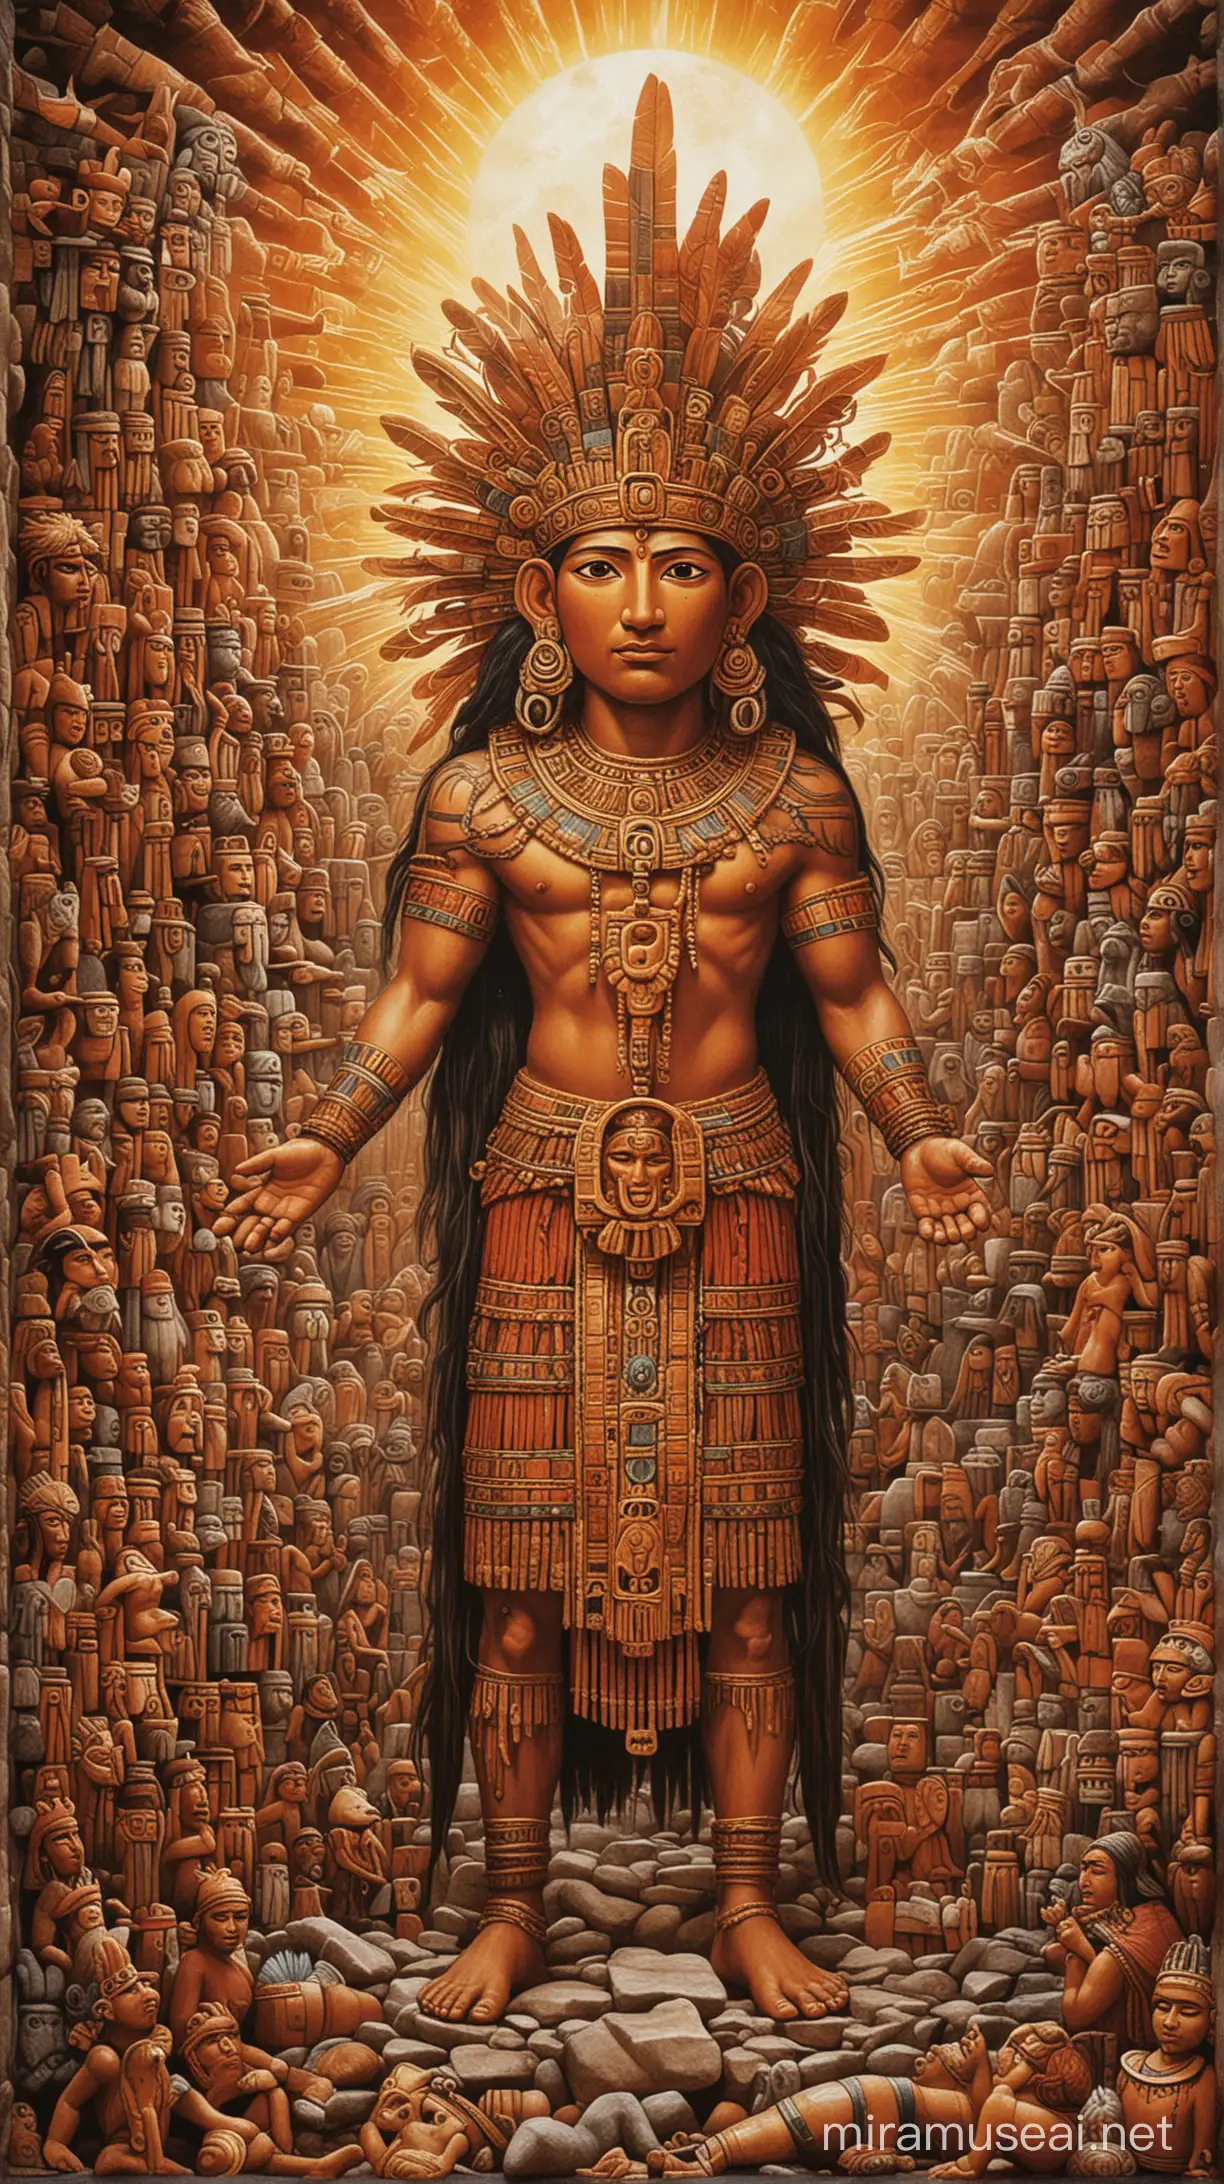 Inca Sun God Inti Surrounded by Offerings and Sacrifices